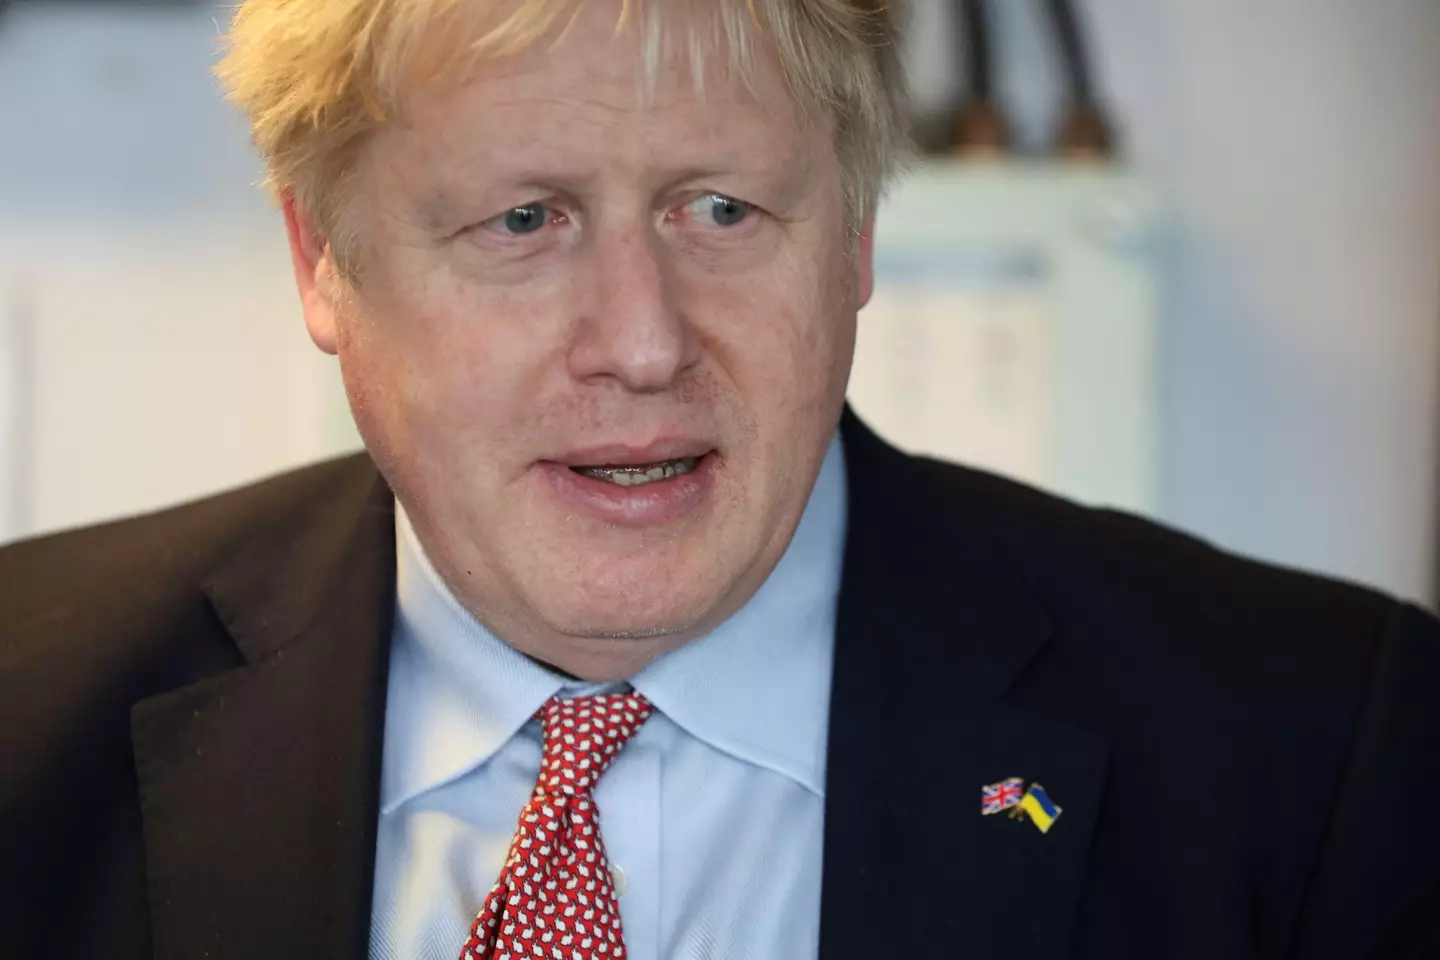 Boris Johnson expressed his concerns about potential chemical weapon usage.